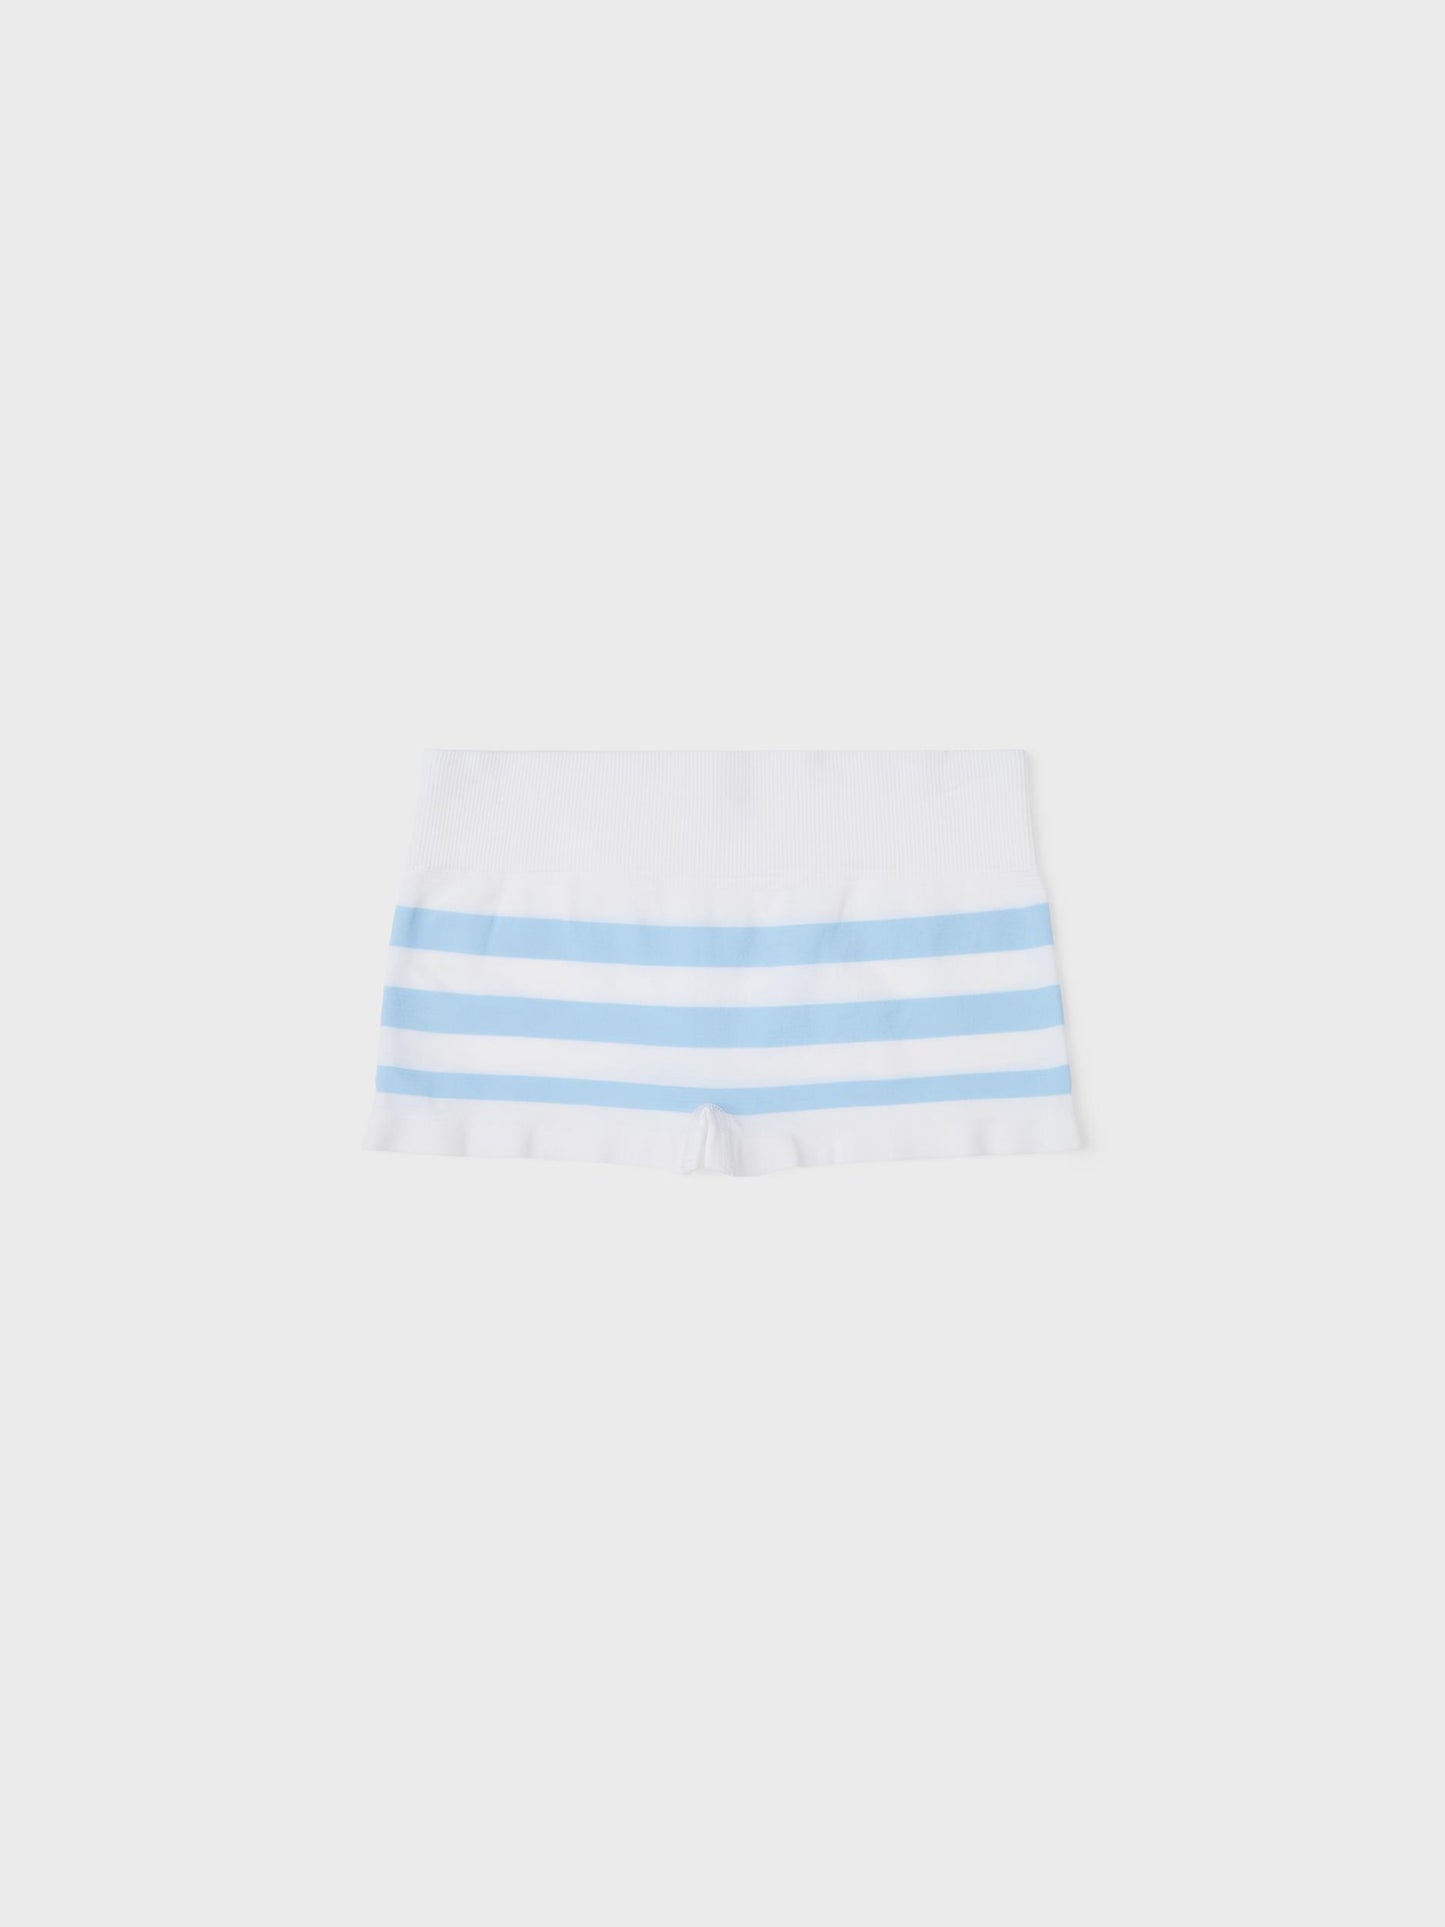 NLFHALEY STRIPE HIPSTER 2 PACK